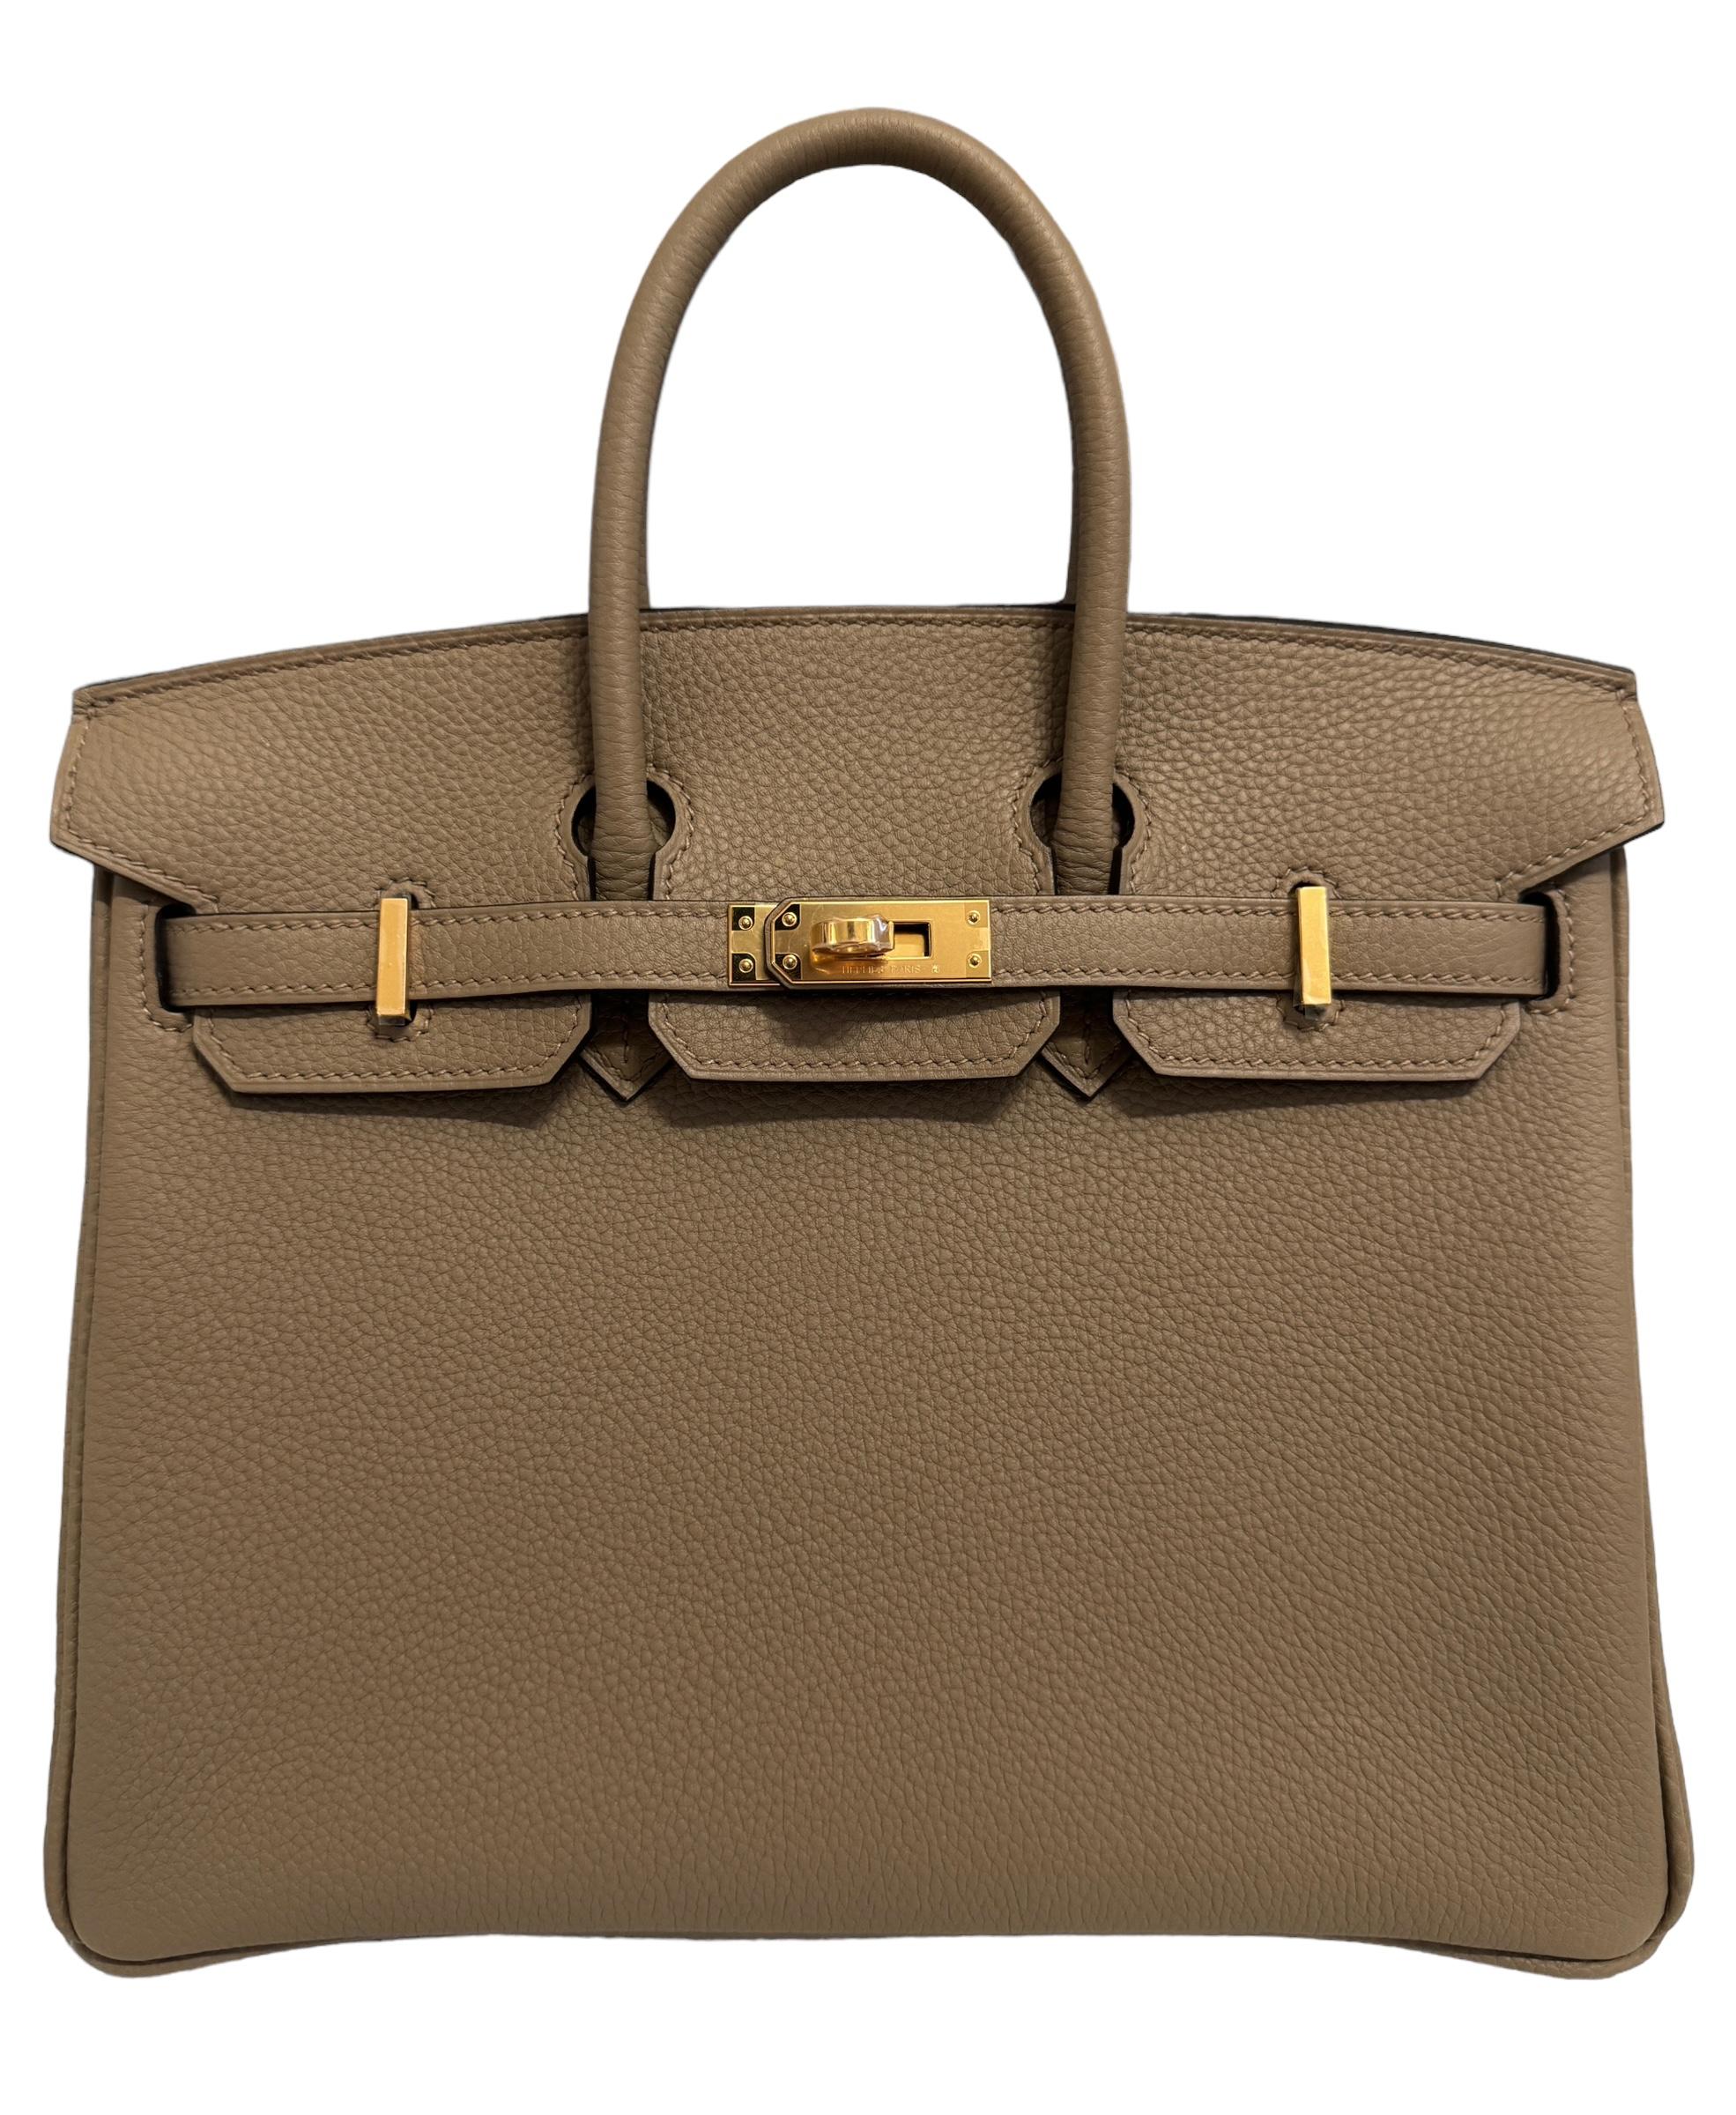 Absolutely Stunning and One The Most Coveted and Difficult and RARE to get NEW Hermes Combos! New Hermes Birkin 25 Beige Marfa Togo Leather complimented by Gold Hardware. B Stamp 2023.

Shop With Confidence from Lux Addicts. Authenticity Guaranteed!